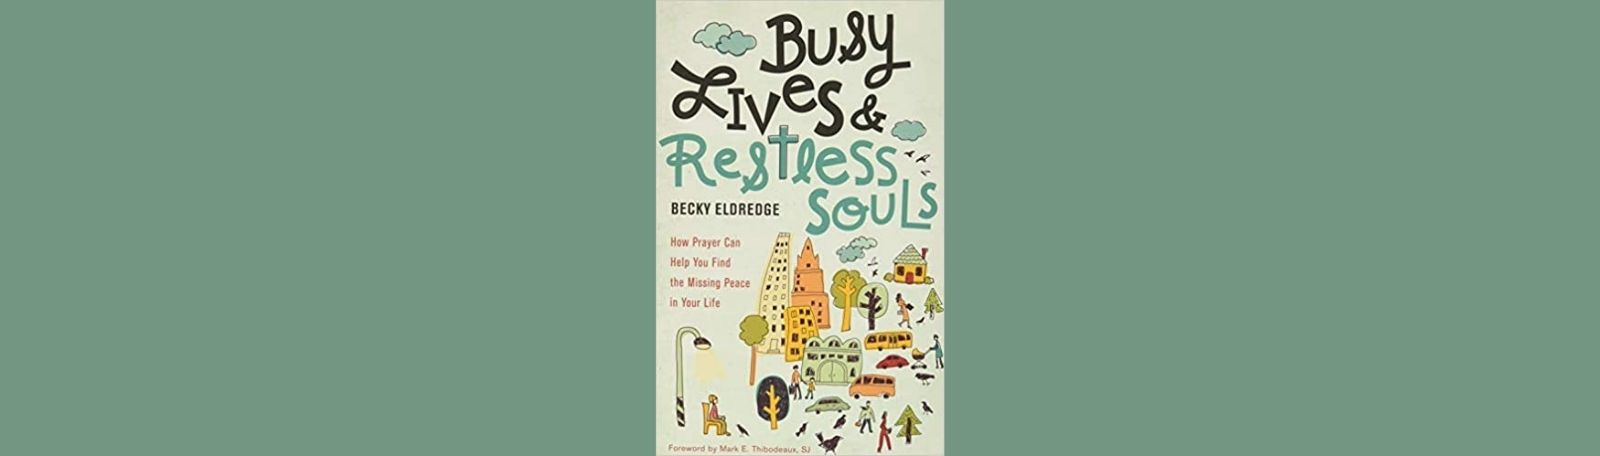 Featured image for “Busy Lives & Restless Souls”